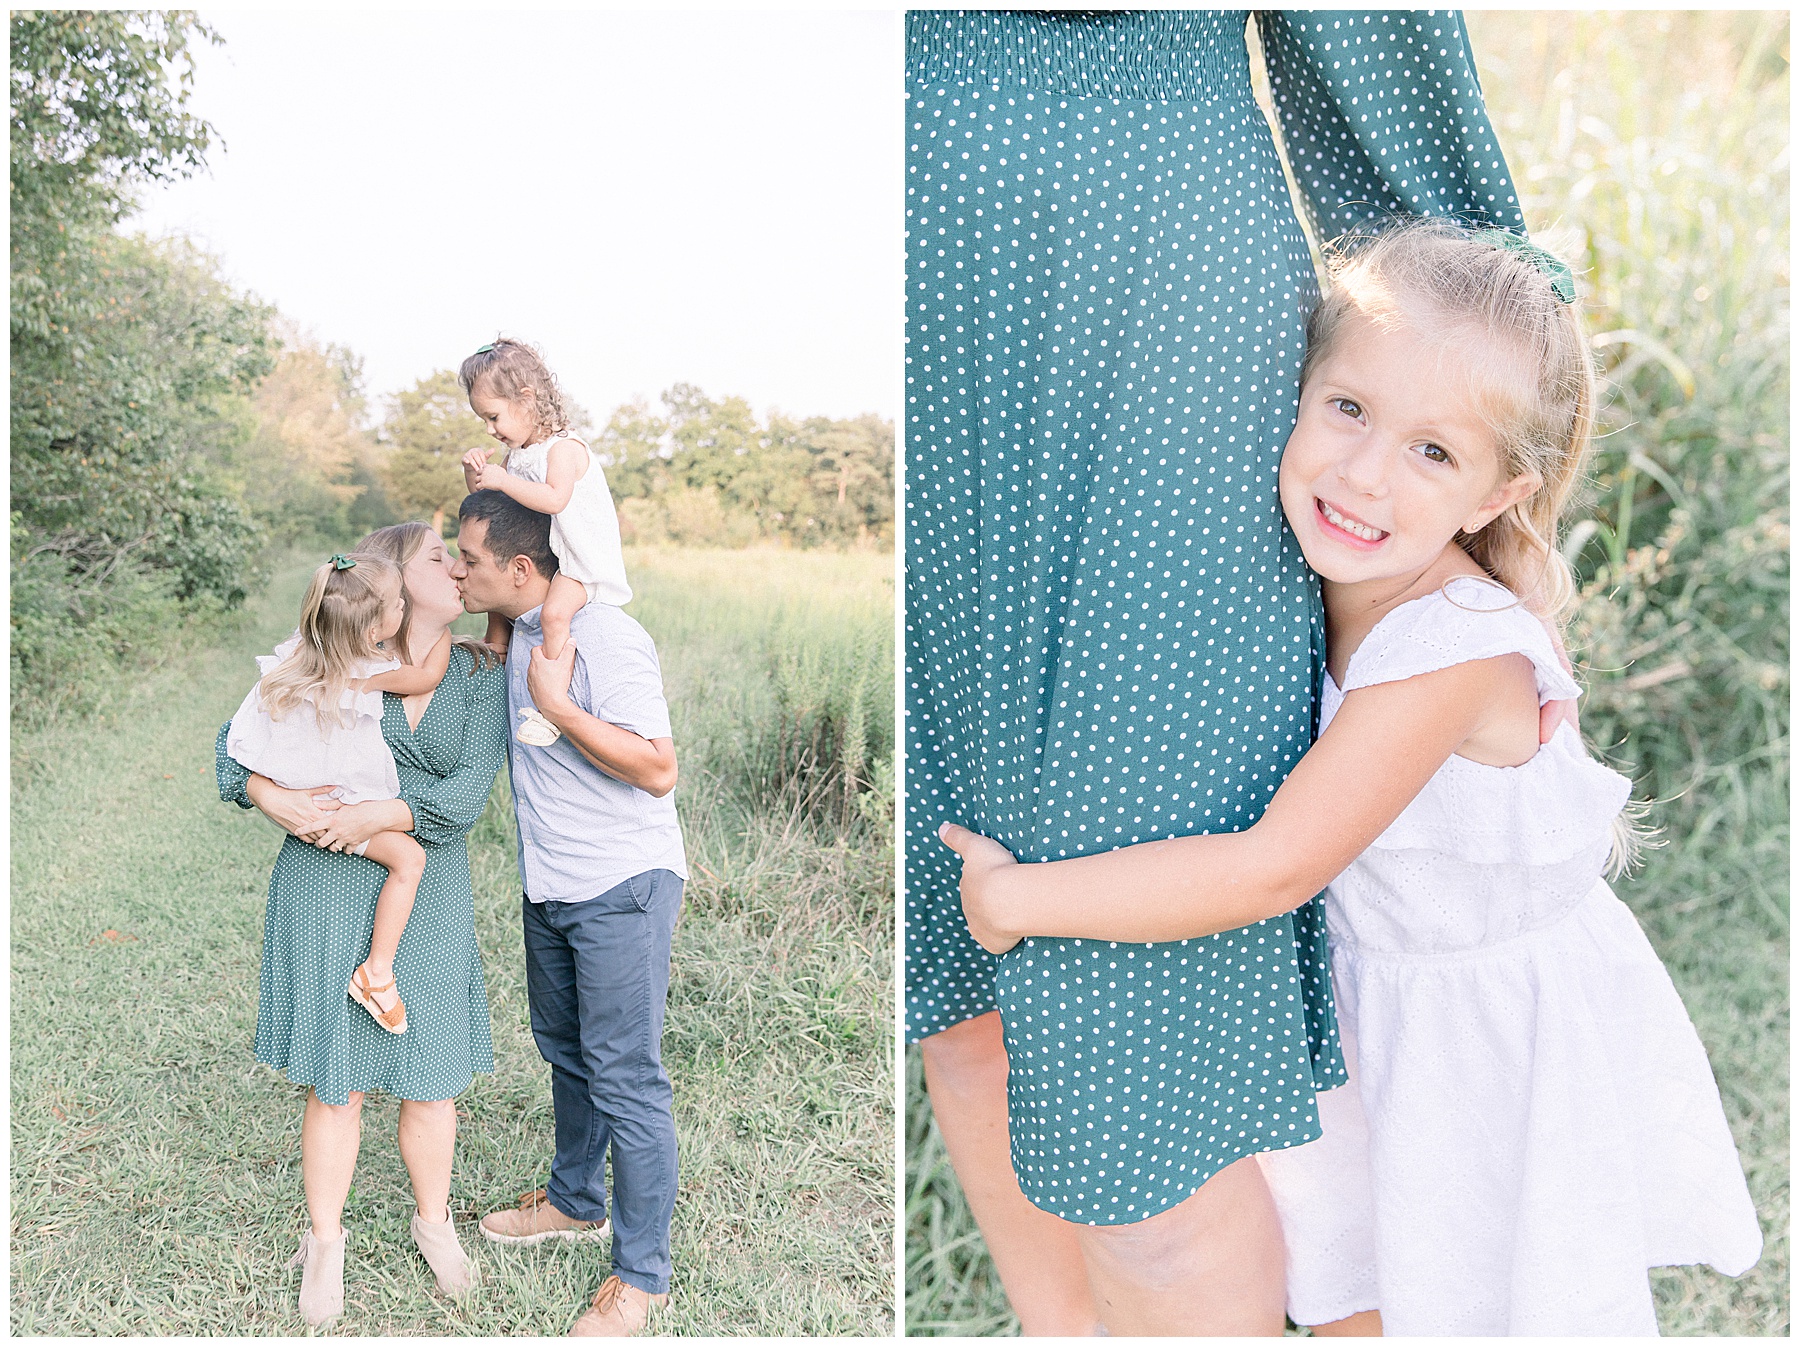 Family of 4 outdoors. Mom and dad are kissing while the two young daughters look at them.Charlotte NC Family photography by Katie Petrick Photography